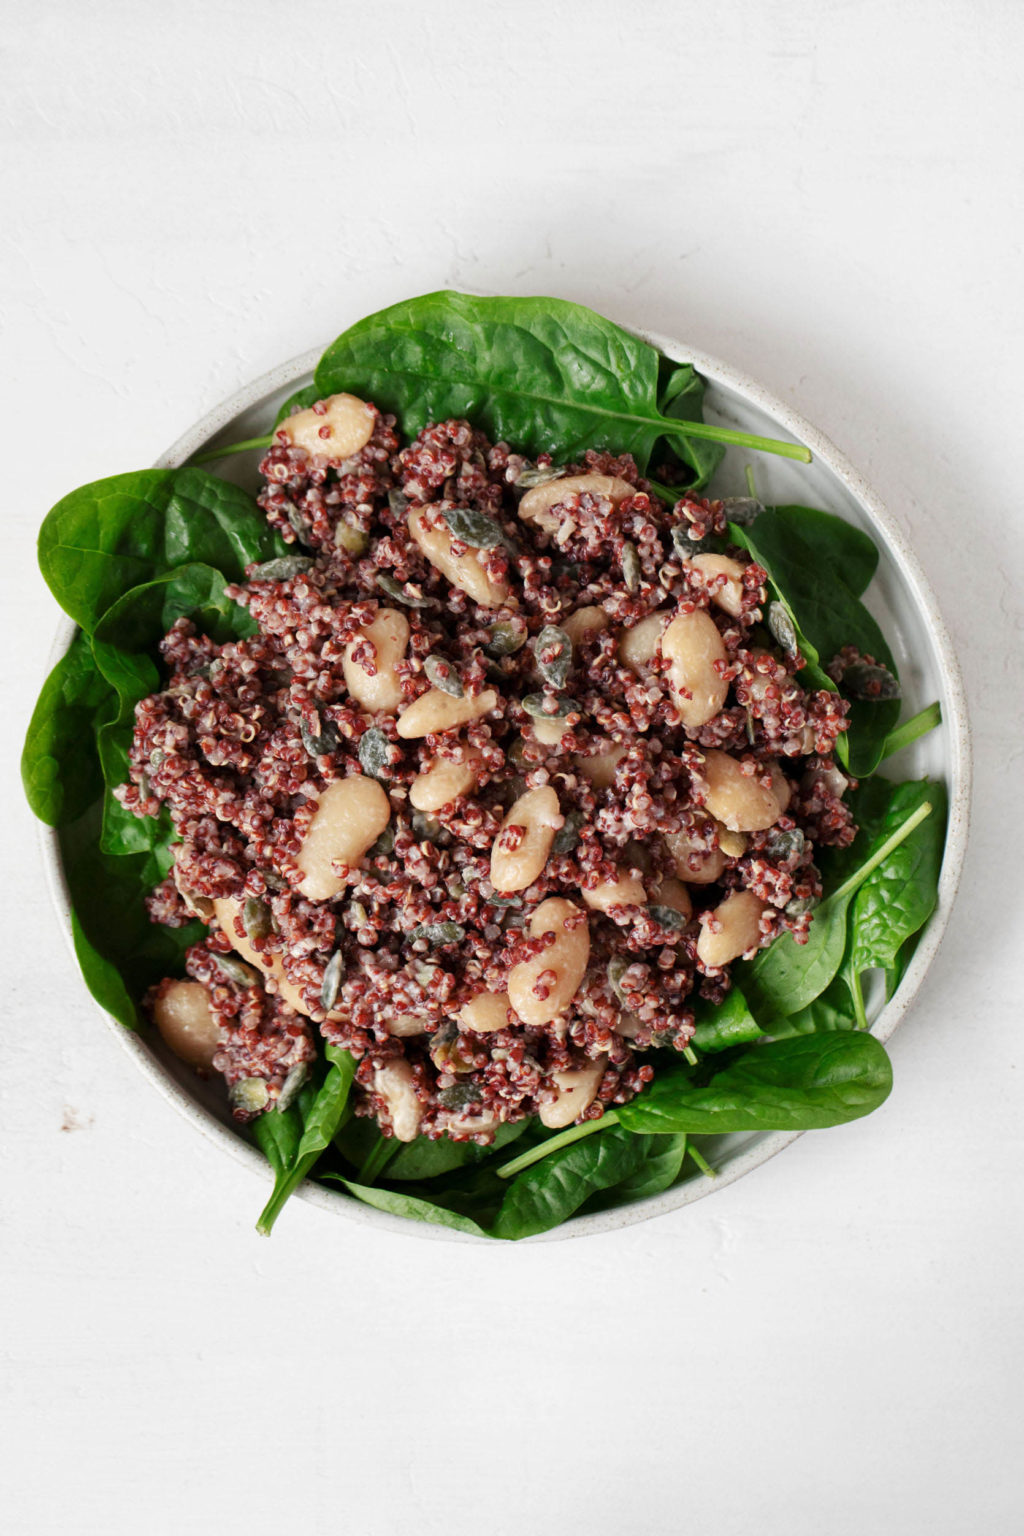 A red quinoa bean salad has been piled on top of a bed of baby spinach. It's held by a white rimmed salad plate.